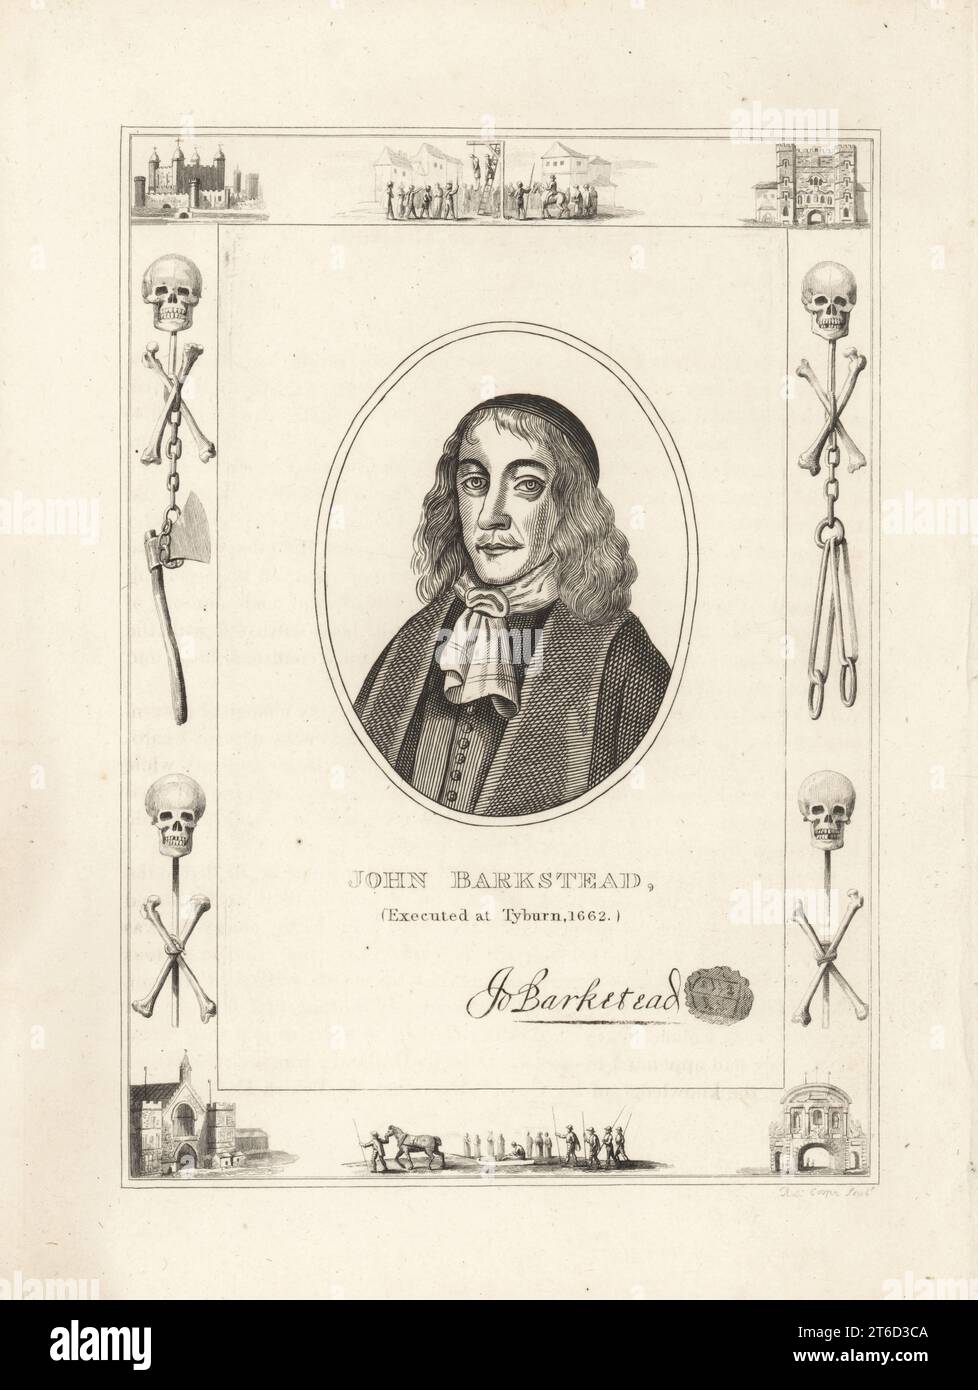 John Bankstead, executed at Tyburn 1662. English major general and regicide of King Charles I, hanged at the restoration. With his autograph and seal. Within a frame decorated with vignettes of skull and cross bones, chains and executioners axe, a man hanging from a gibbet at Tyburn, a condemned man on a sled, the Tower of London, Newgate Prison. Copperplate engraving by Robert Cooper from James Caulfields The High Court of Justice, London, 1820. Stock Photo